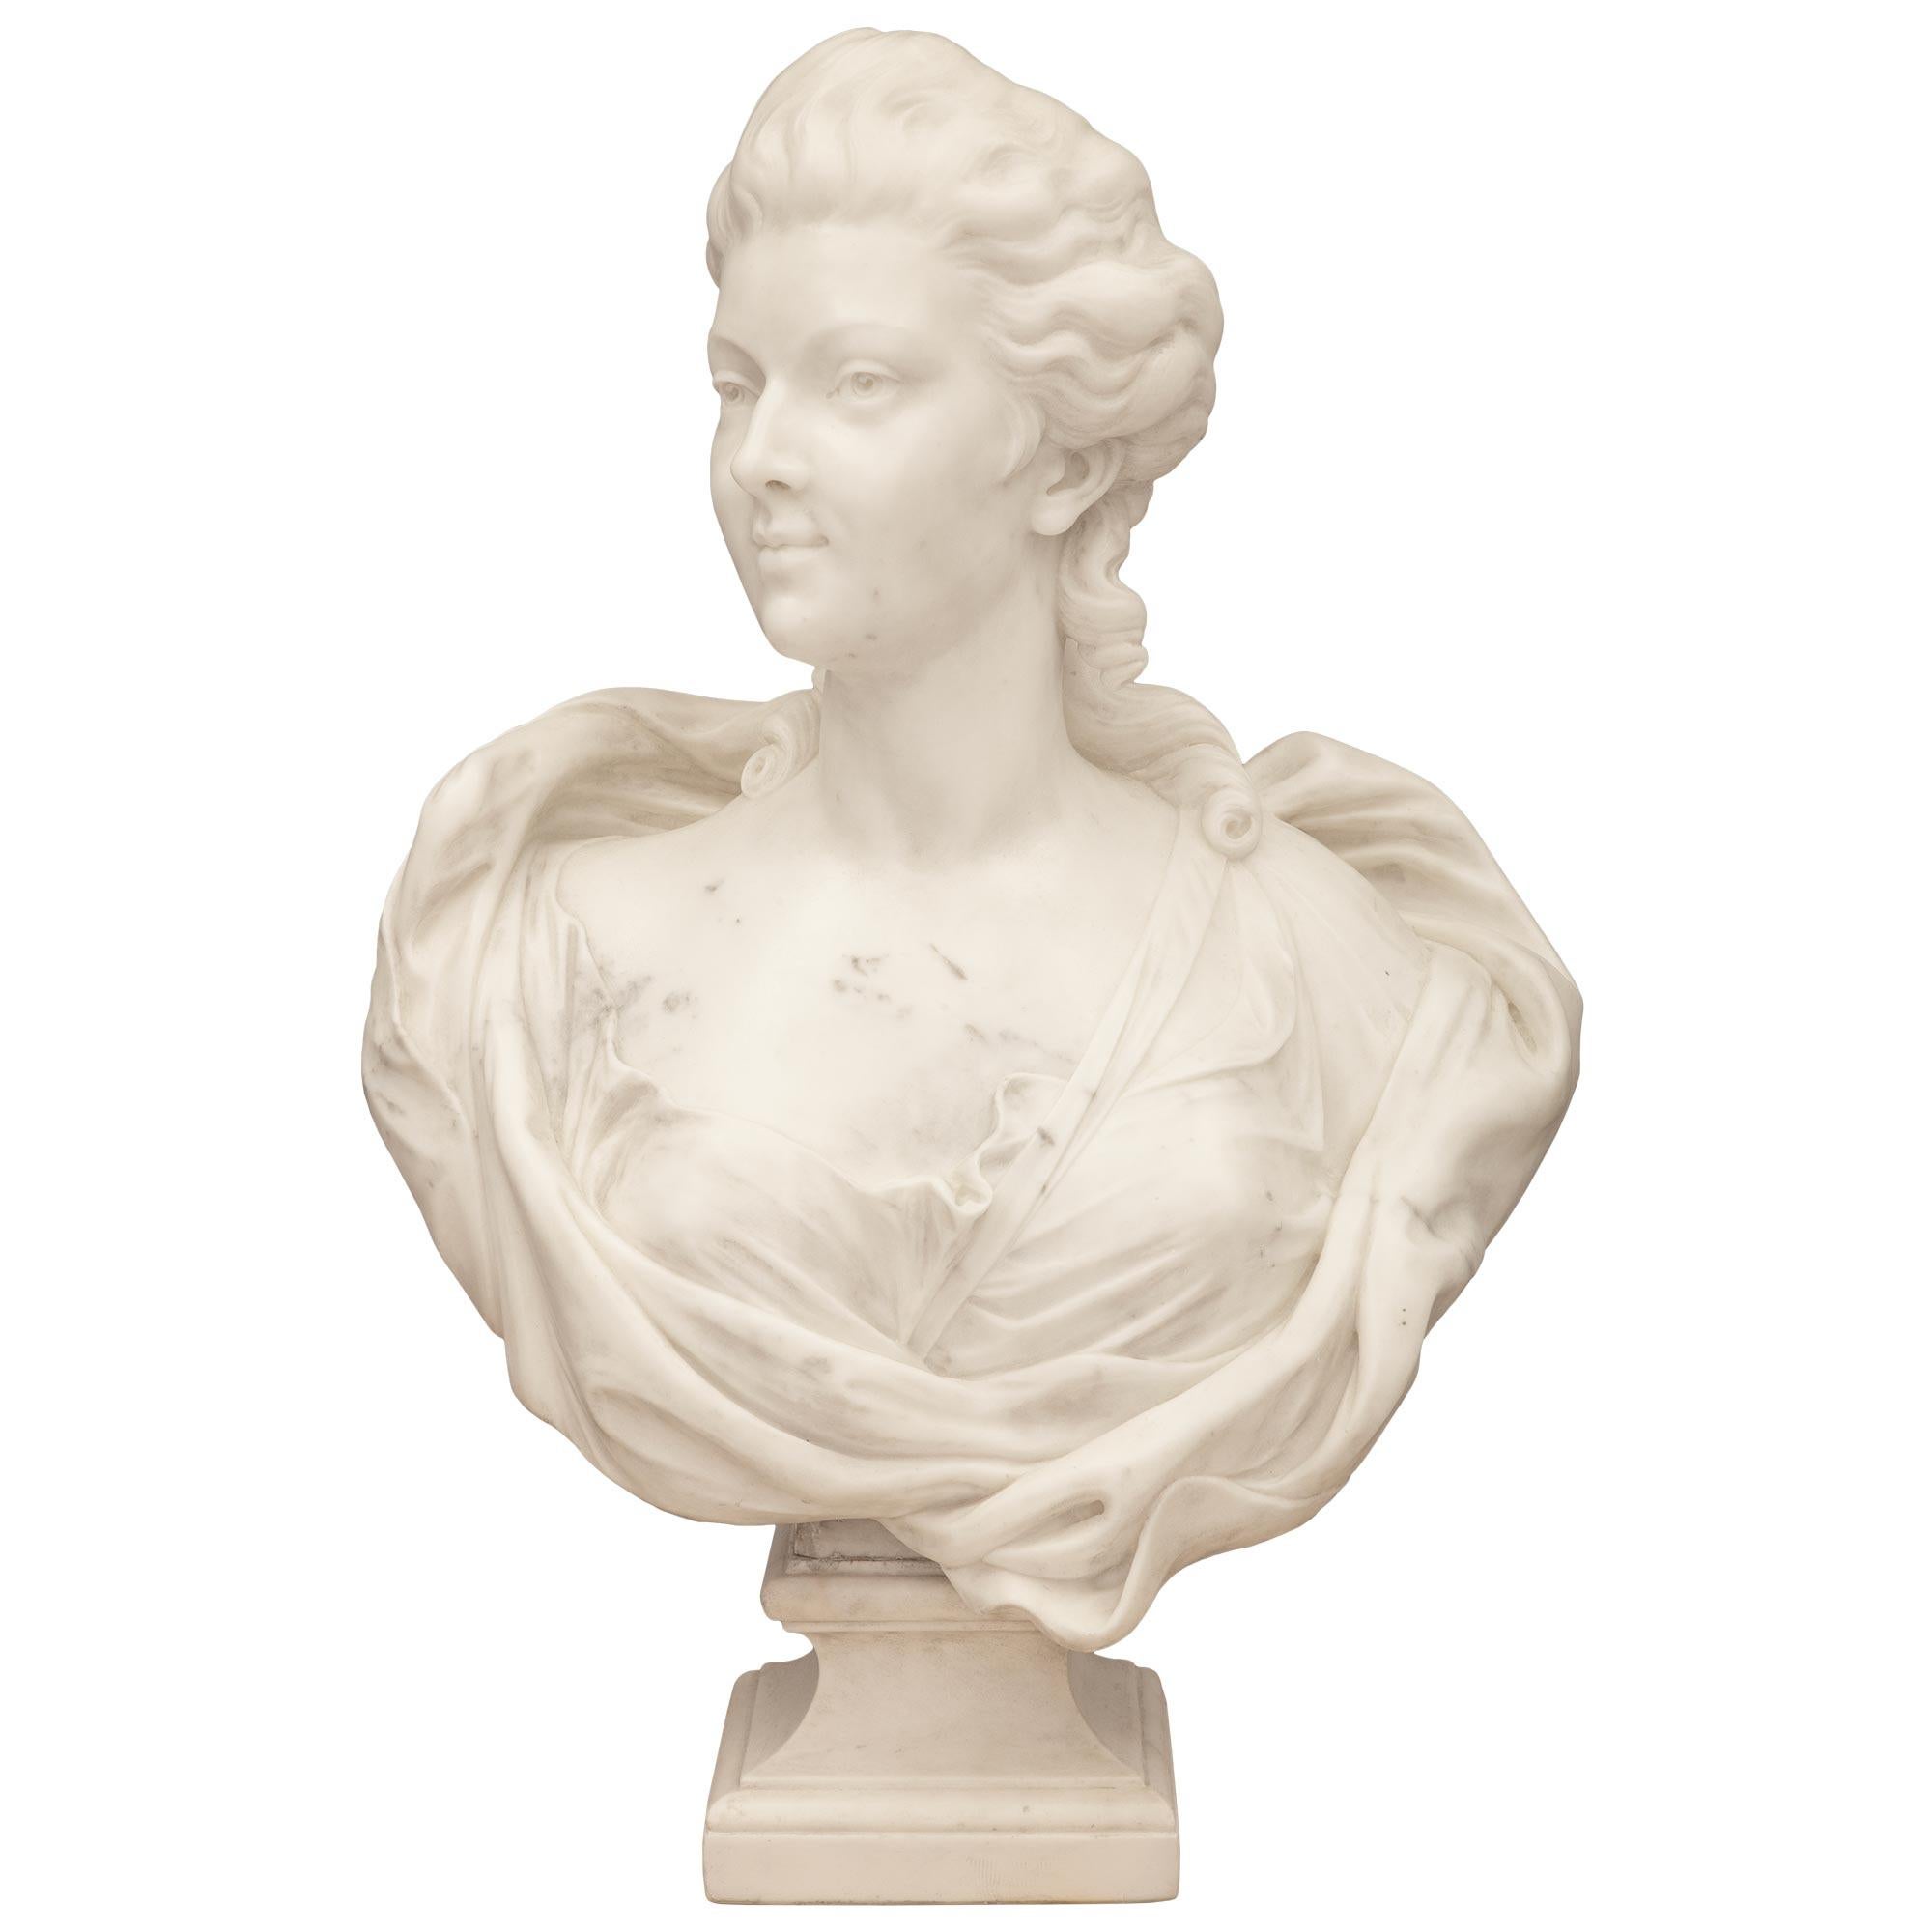 A striking and high quality Italian 19th century white Carrara marble bust of a beautiful young lady. The bust is raised by a square socle shaped pedestal support with a fine wrap around mottled border and elegantly curved sides. The wonderfully